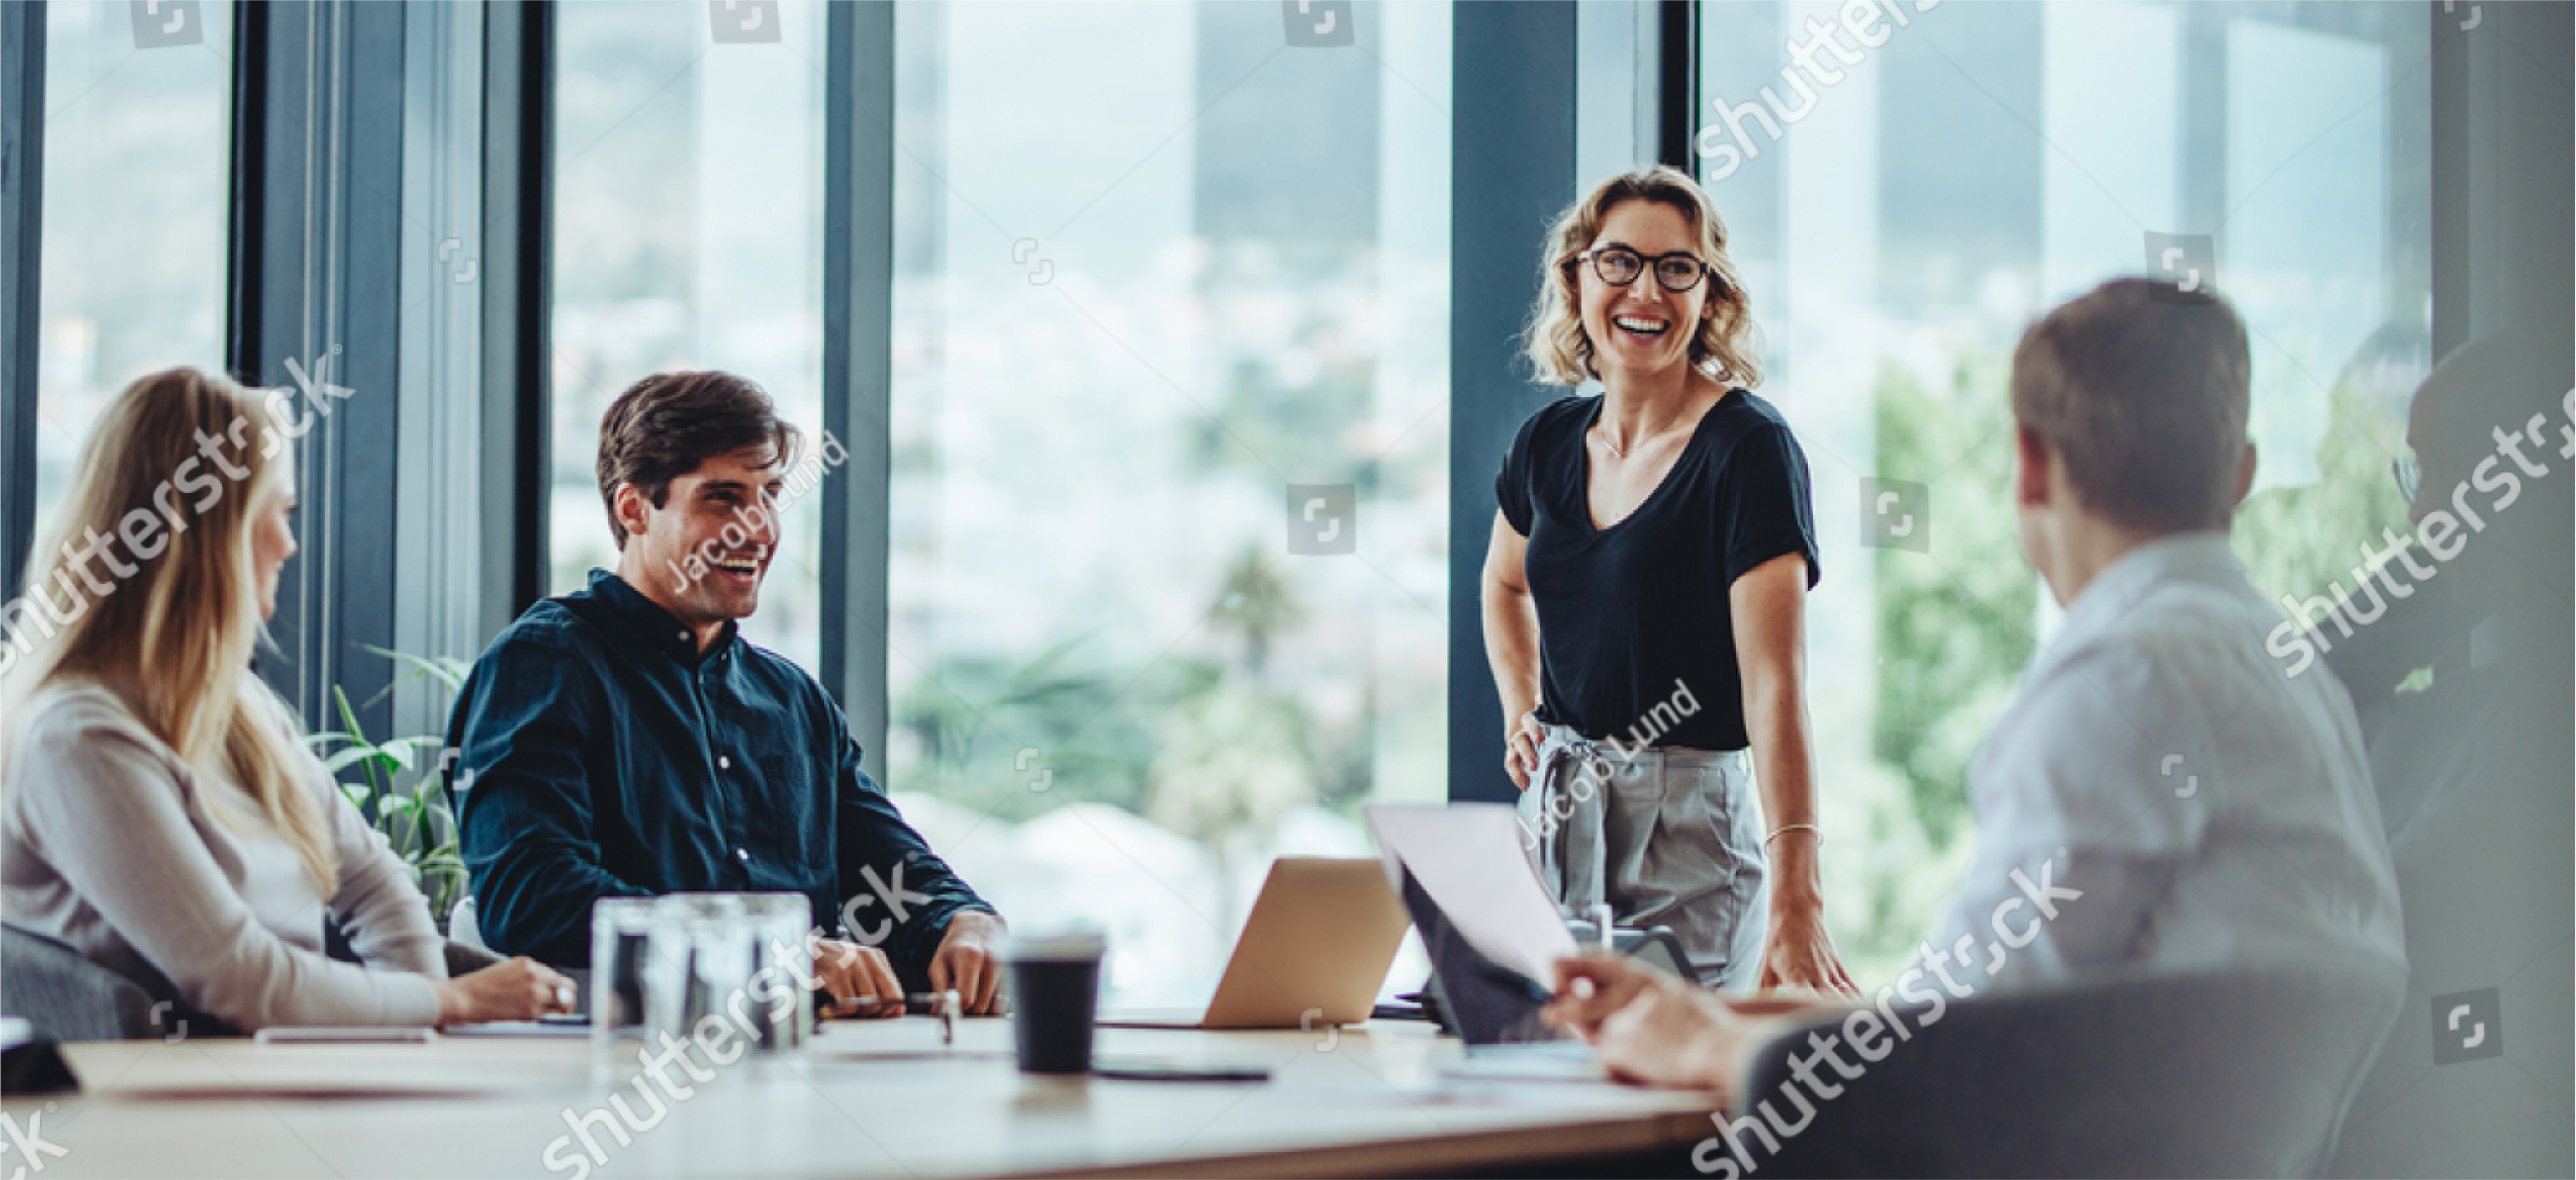 stock-photo-office-colleagues-having-casual-discussion-during-meeting-in-conference-room-group-of-men-and-1791564398